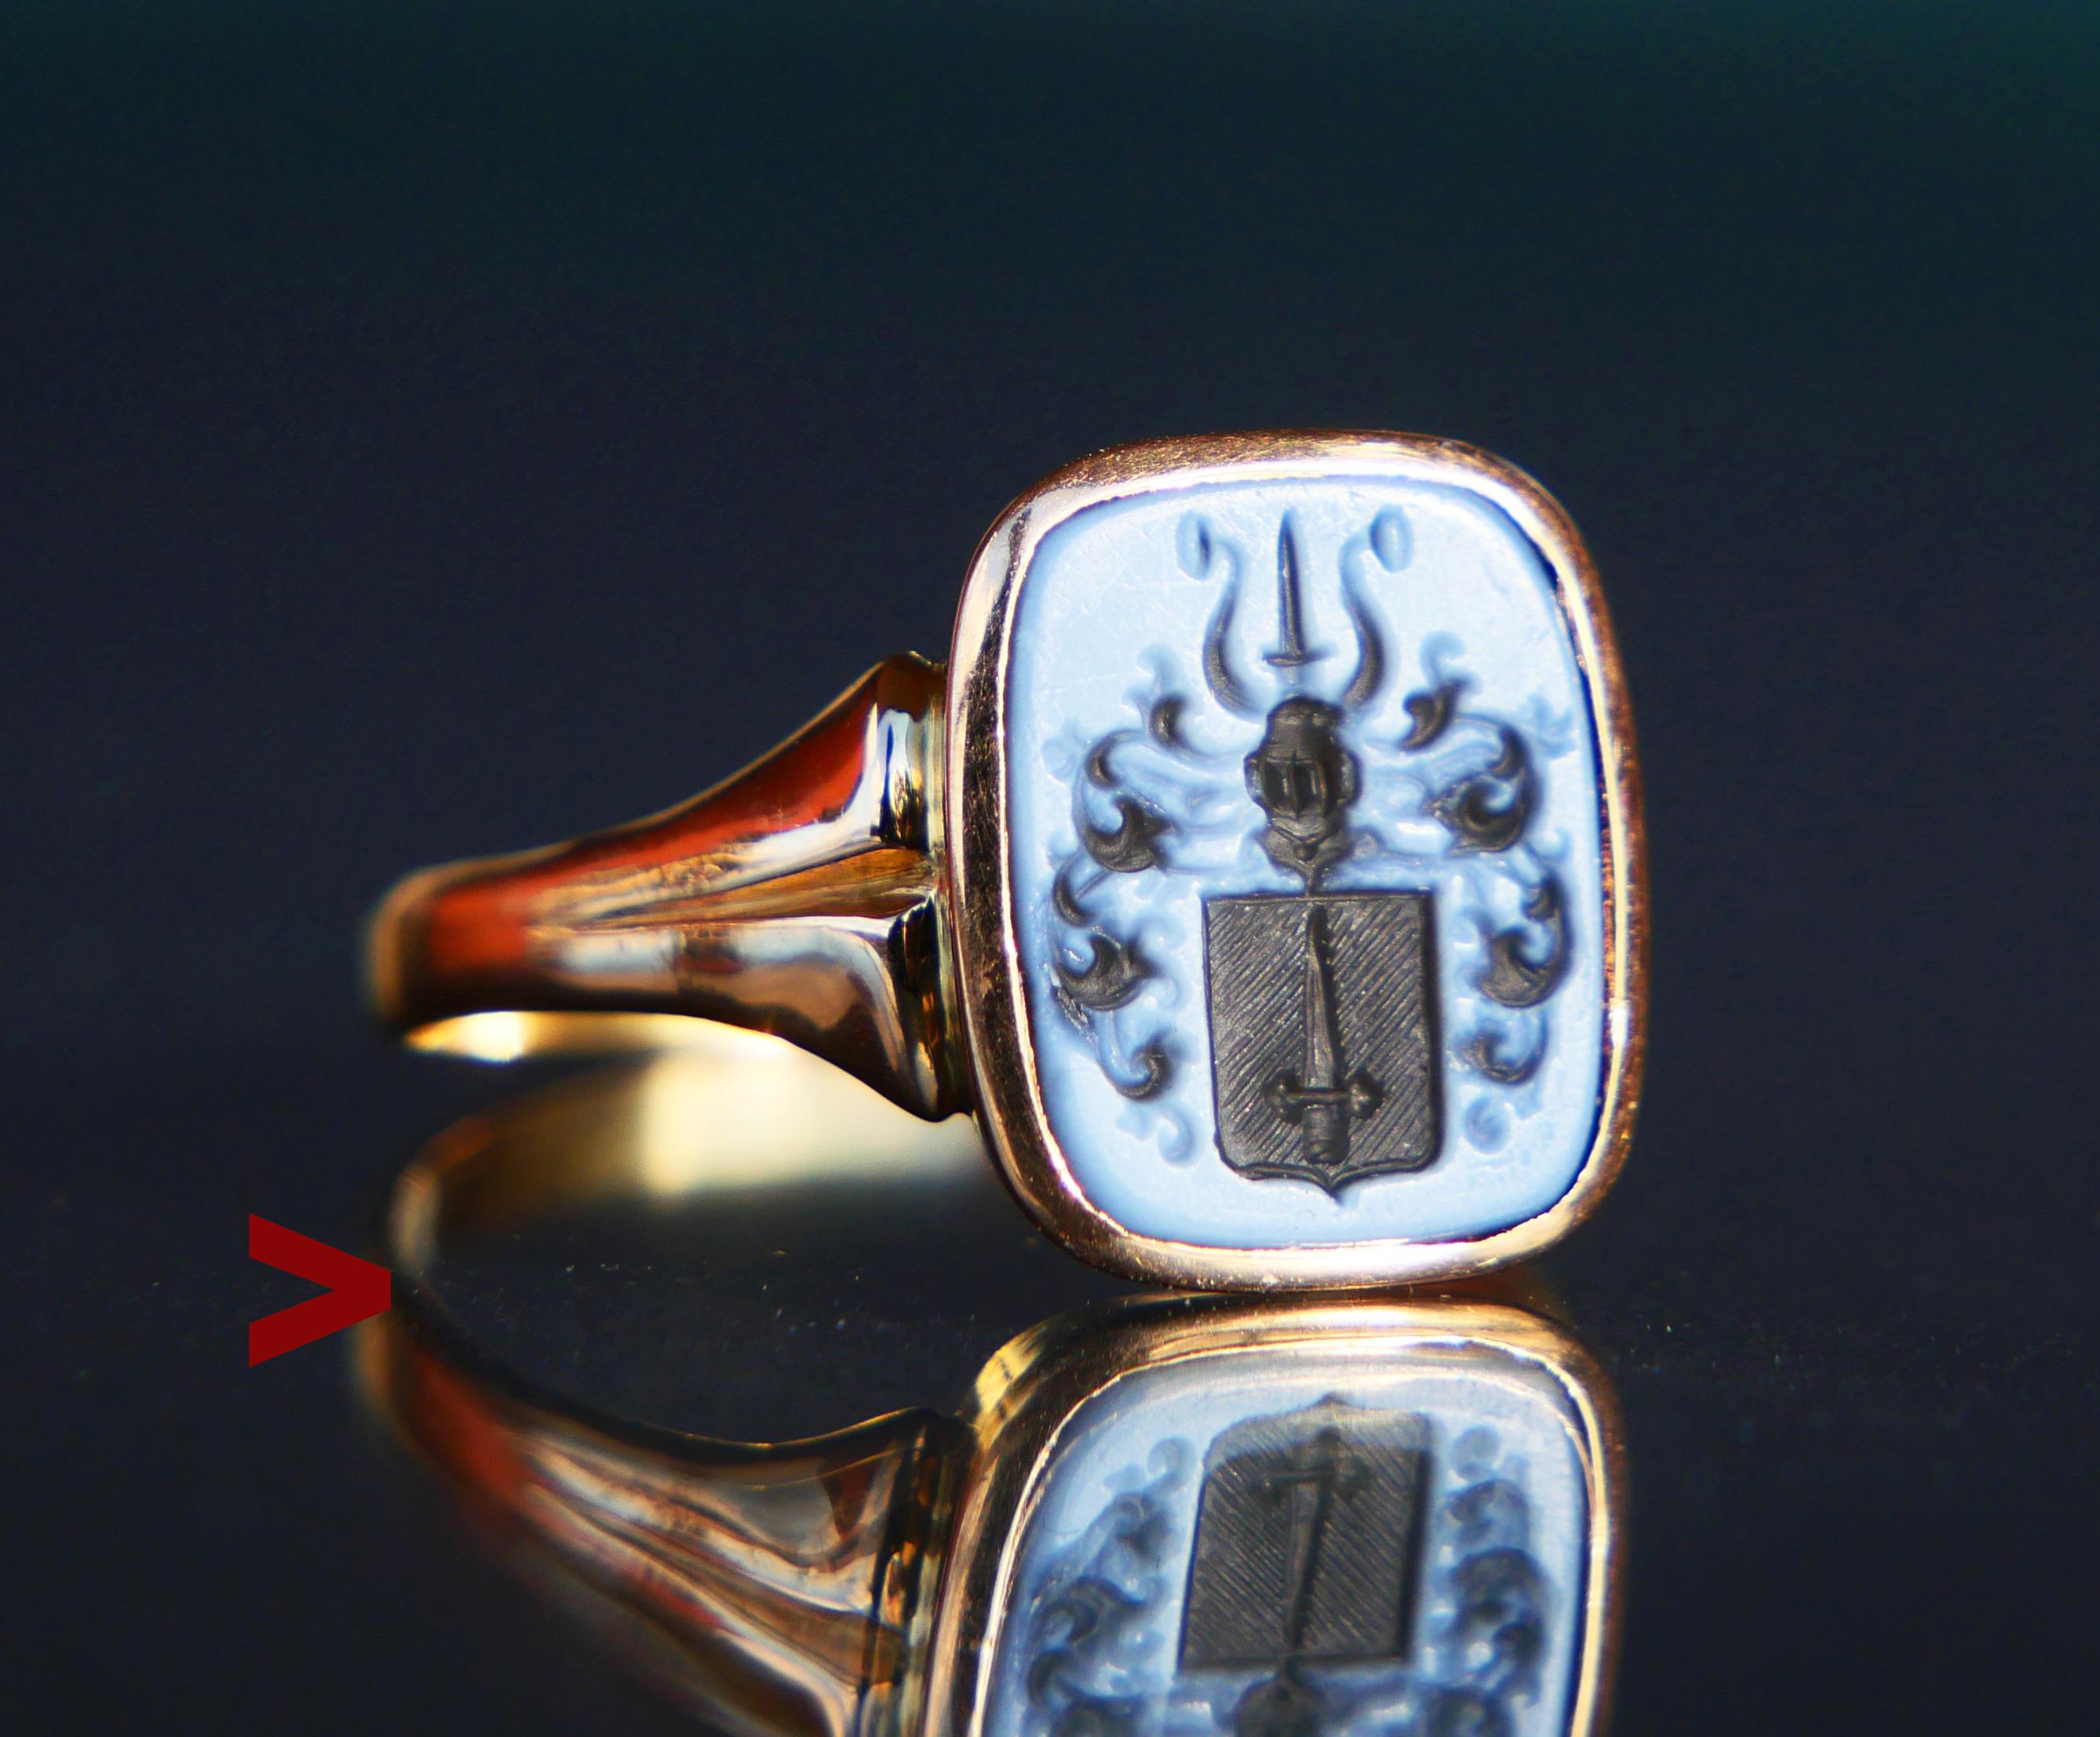 Signet Intaglio Ring featuring banded / two-layered/banded Sardonyx stone with the heraldic depiction of a Sword in the middle of the shield under the Knight's Helmet with horns decorated with plumage. This is a Coat of Arms of the Swedish noble